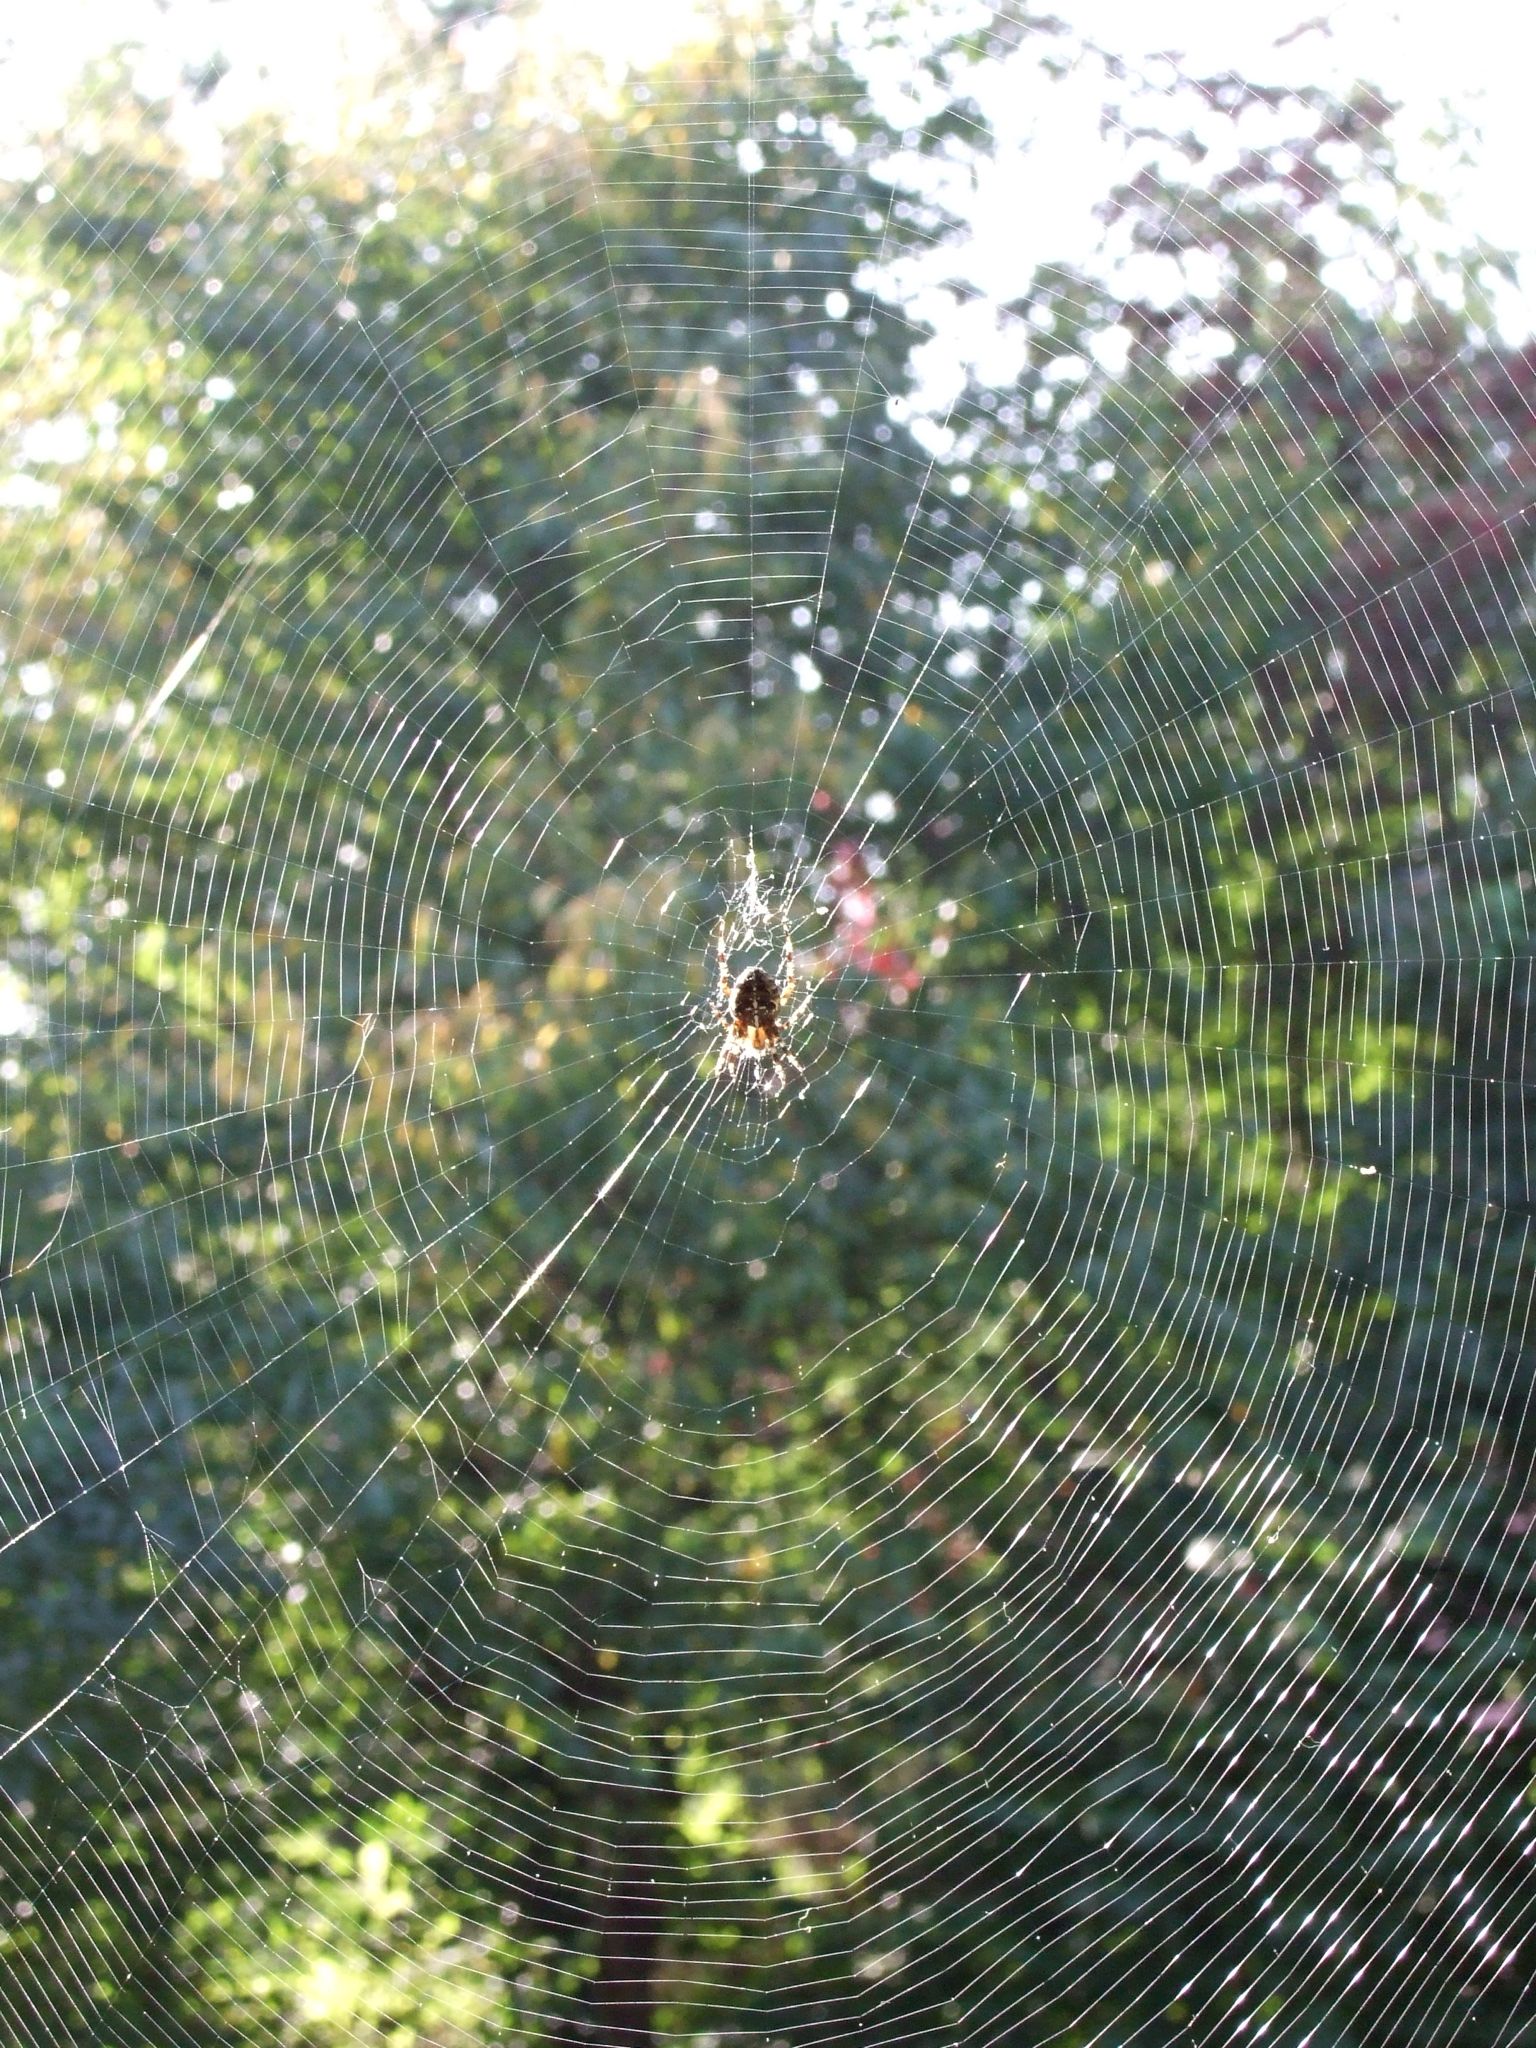 Photo 13 of 23 from the album Spiders.